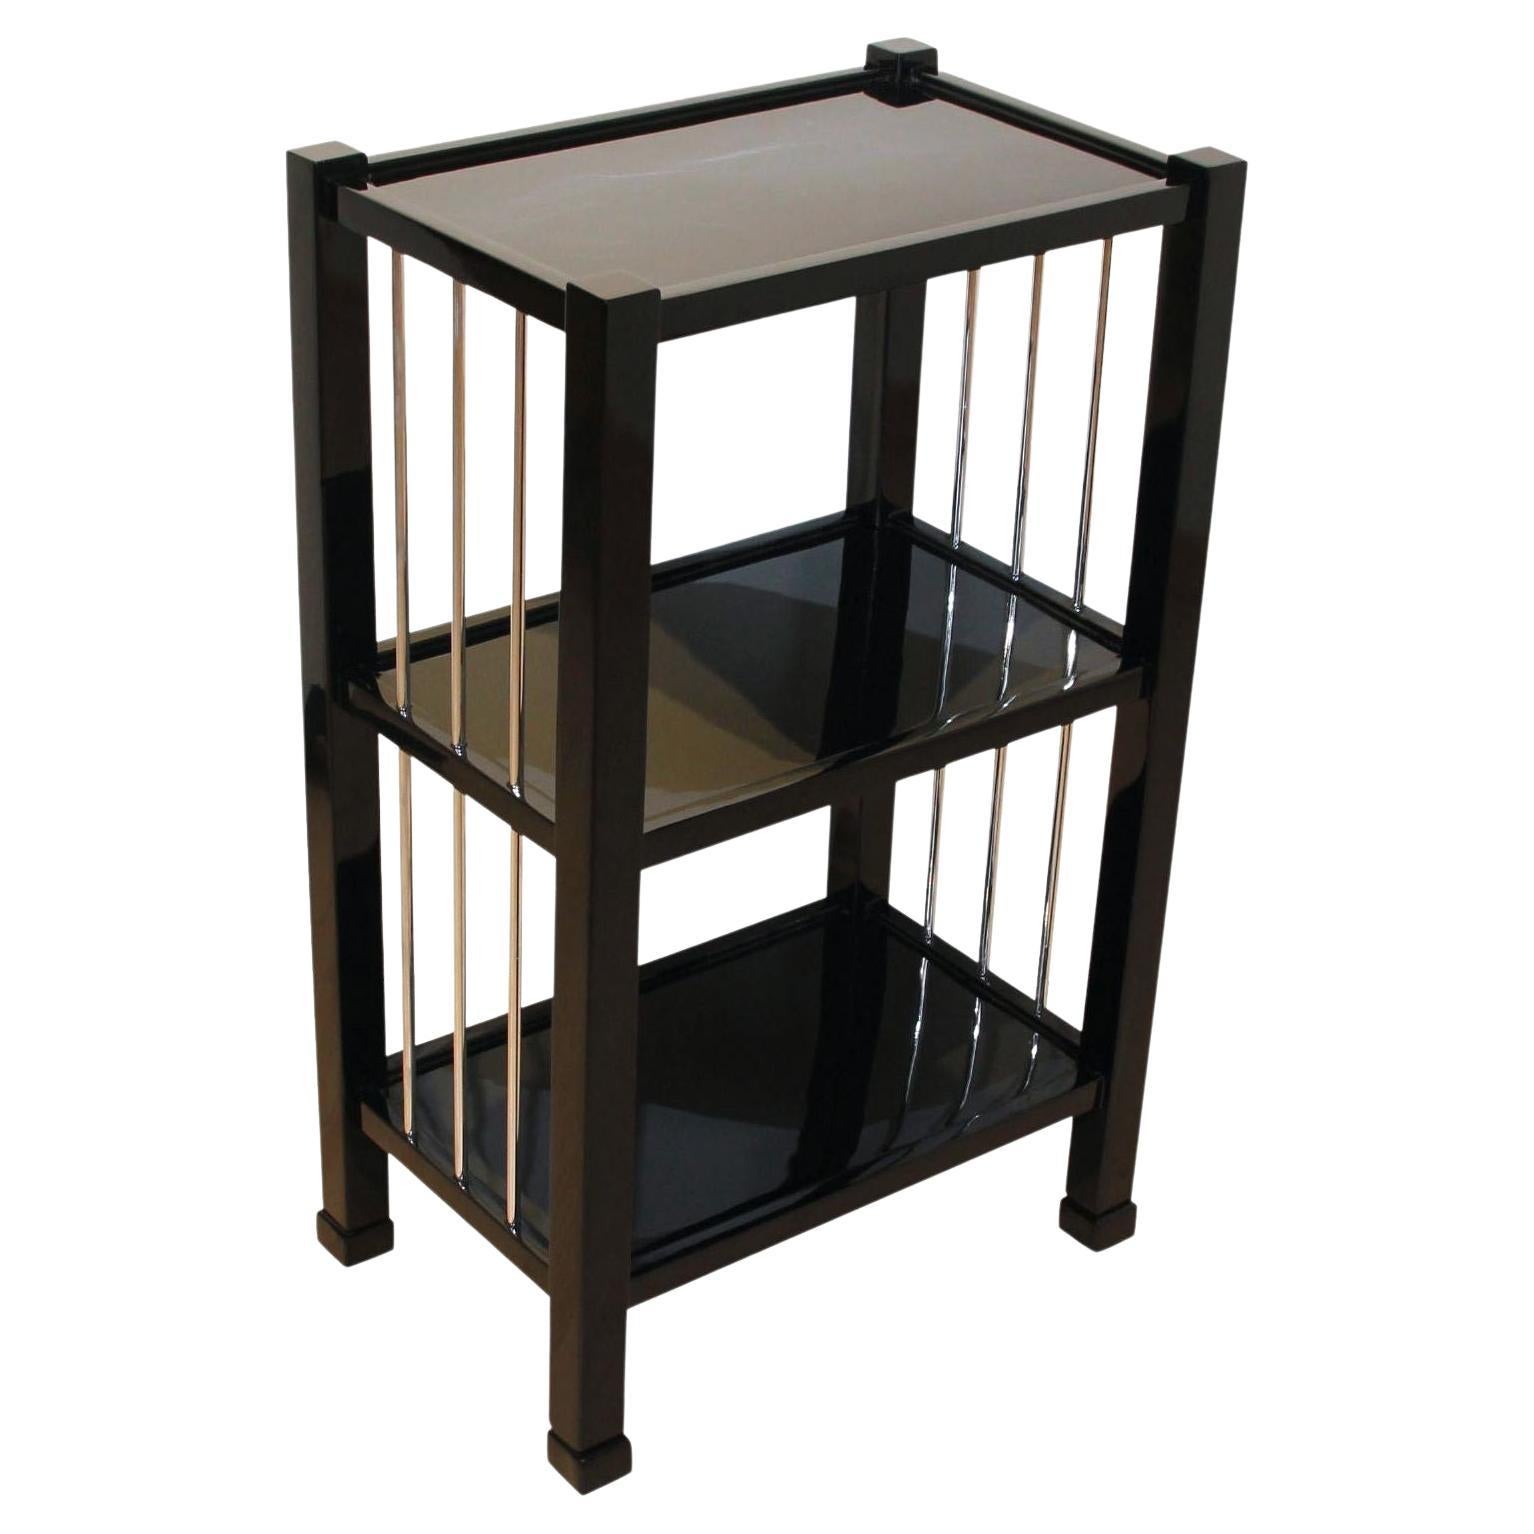 Art Deco Etagere or Shelf, Black Lacquer and Metal, France, circa 1930